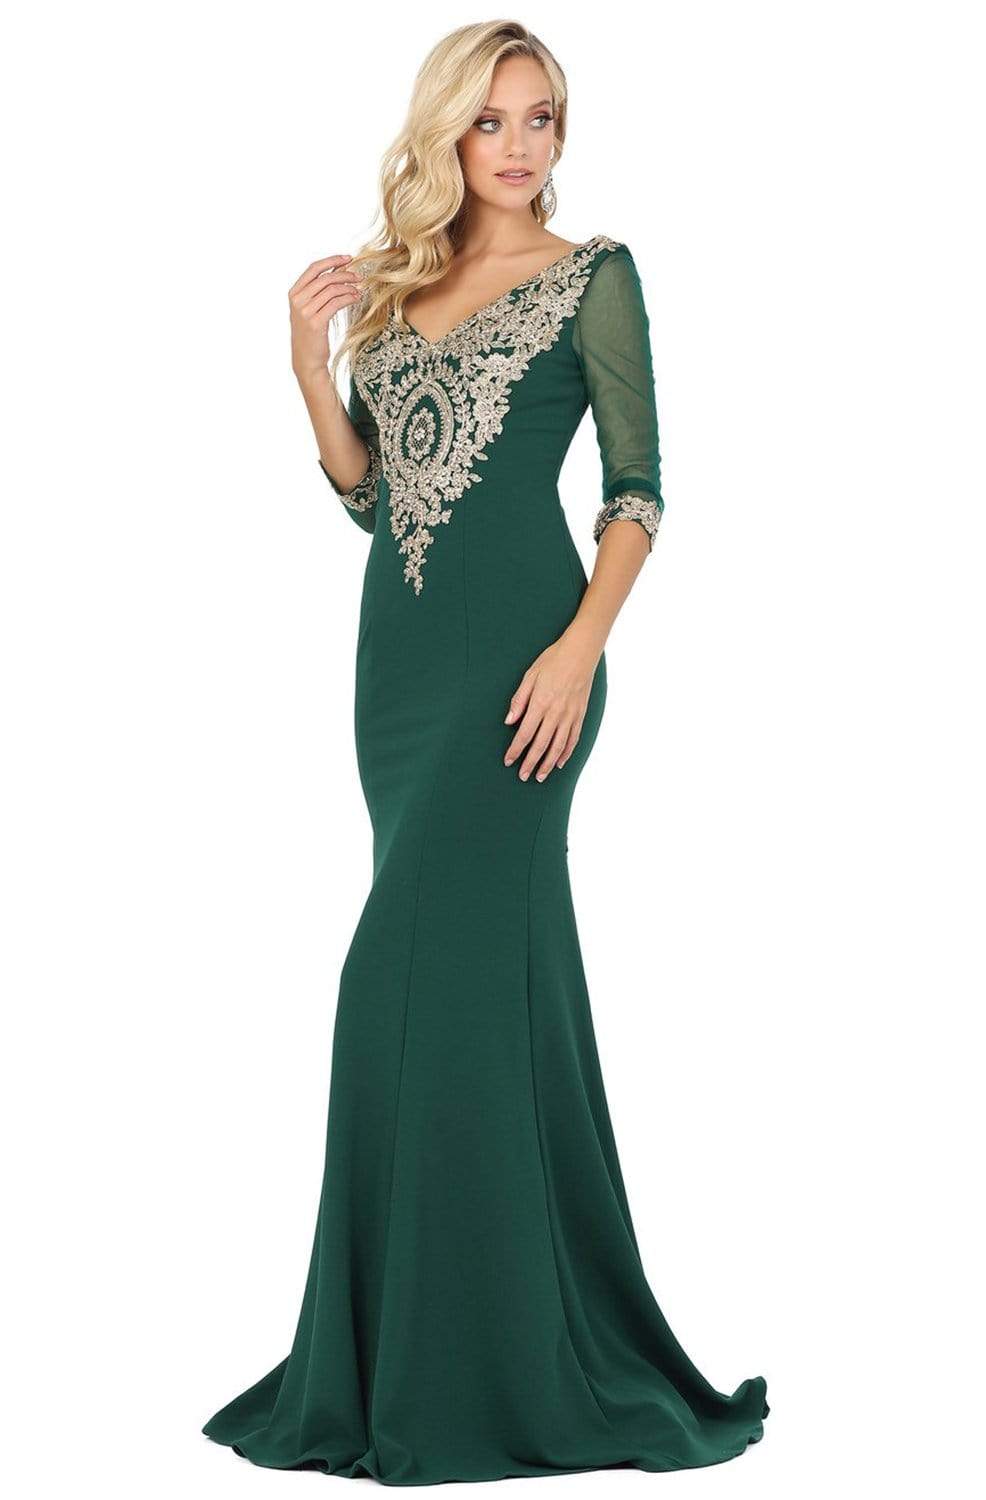 Dancing Queen - 2911 Lace Appliqued V Neck Mermaid Prom Dress Prom Dresses XS / Hunter Green